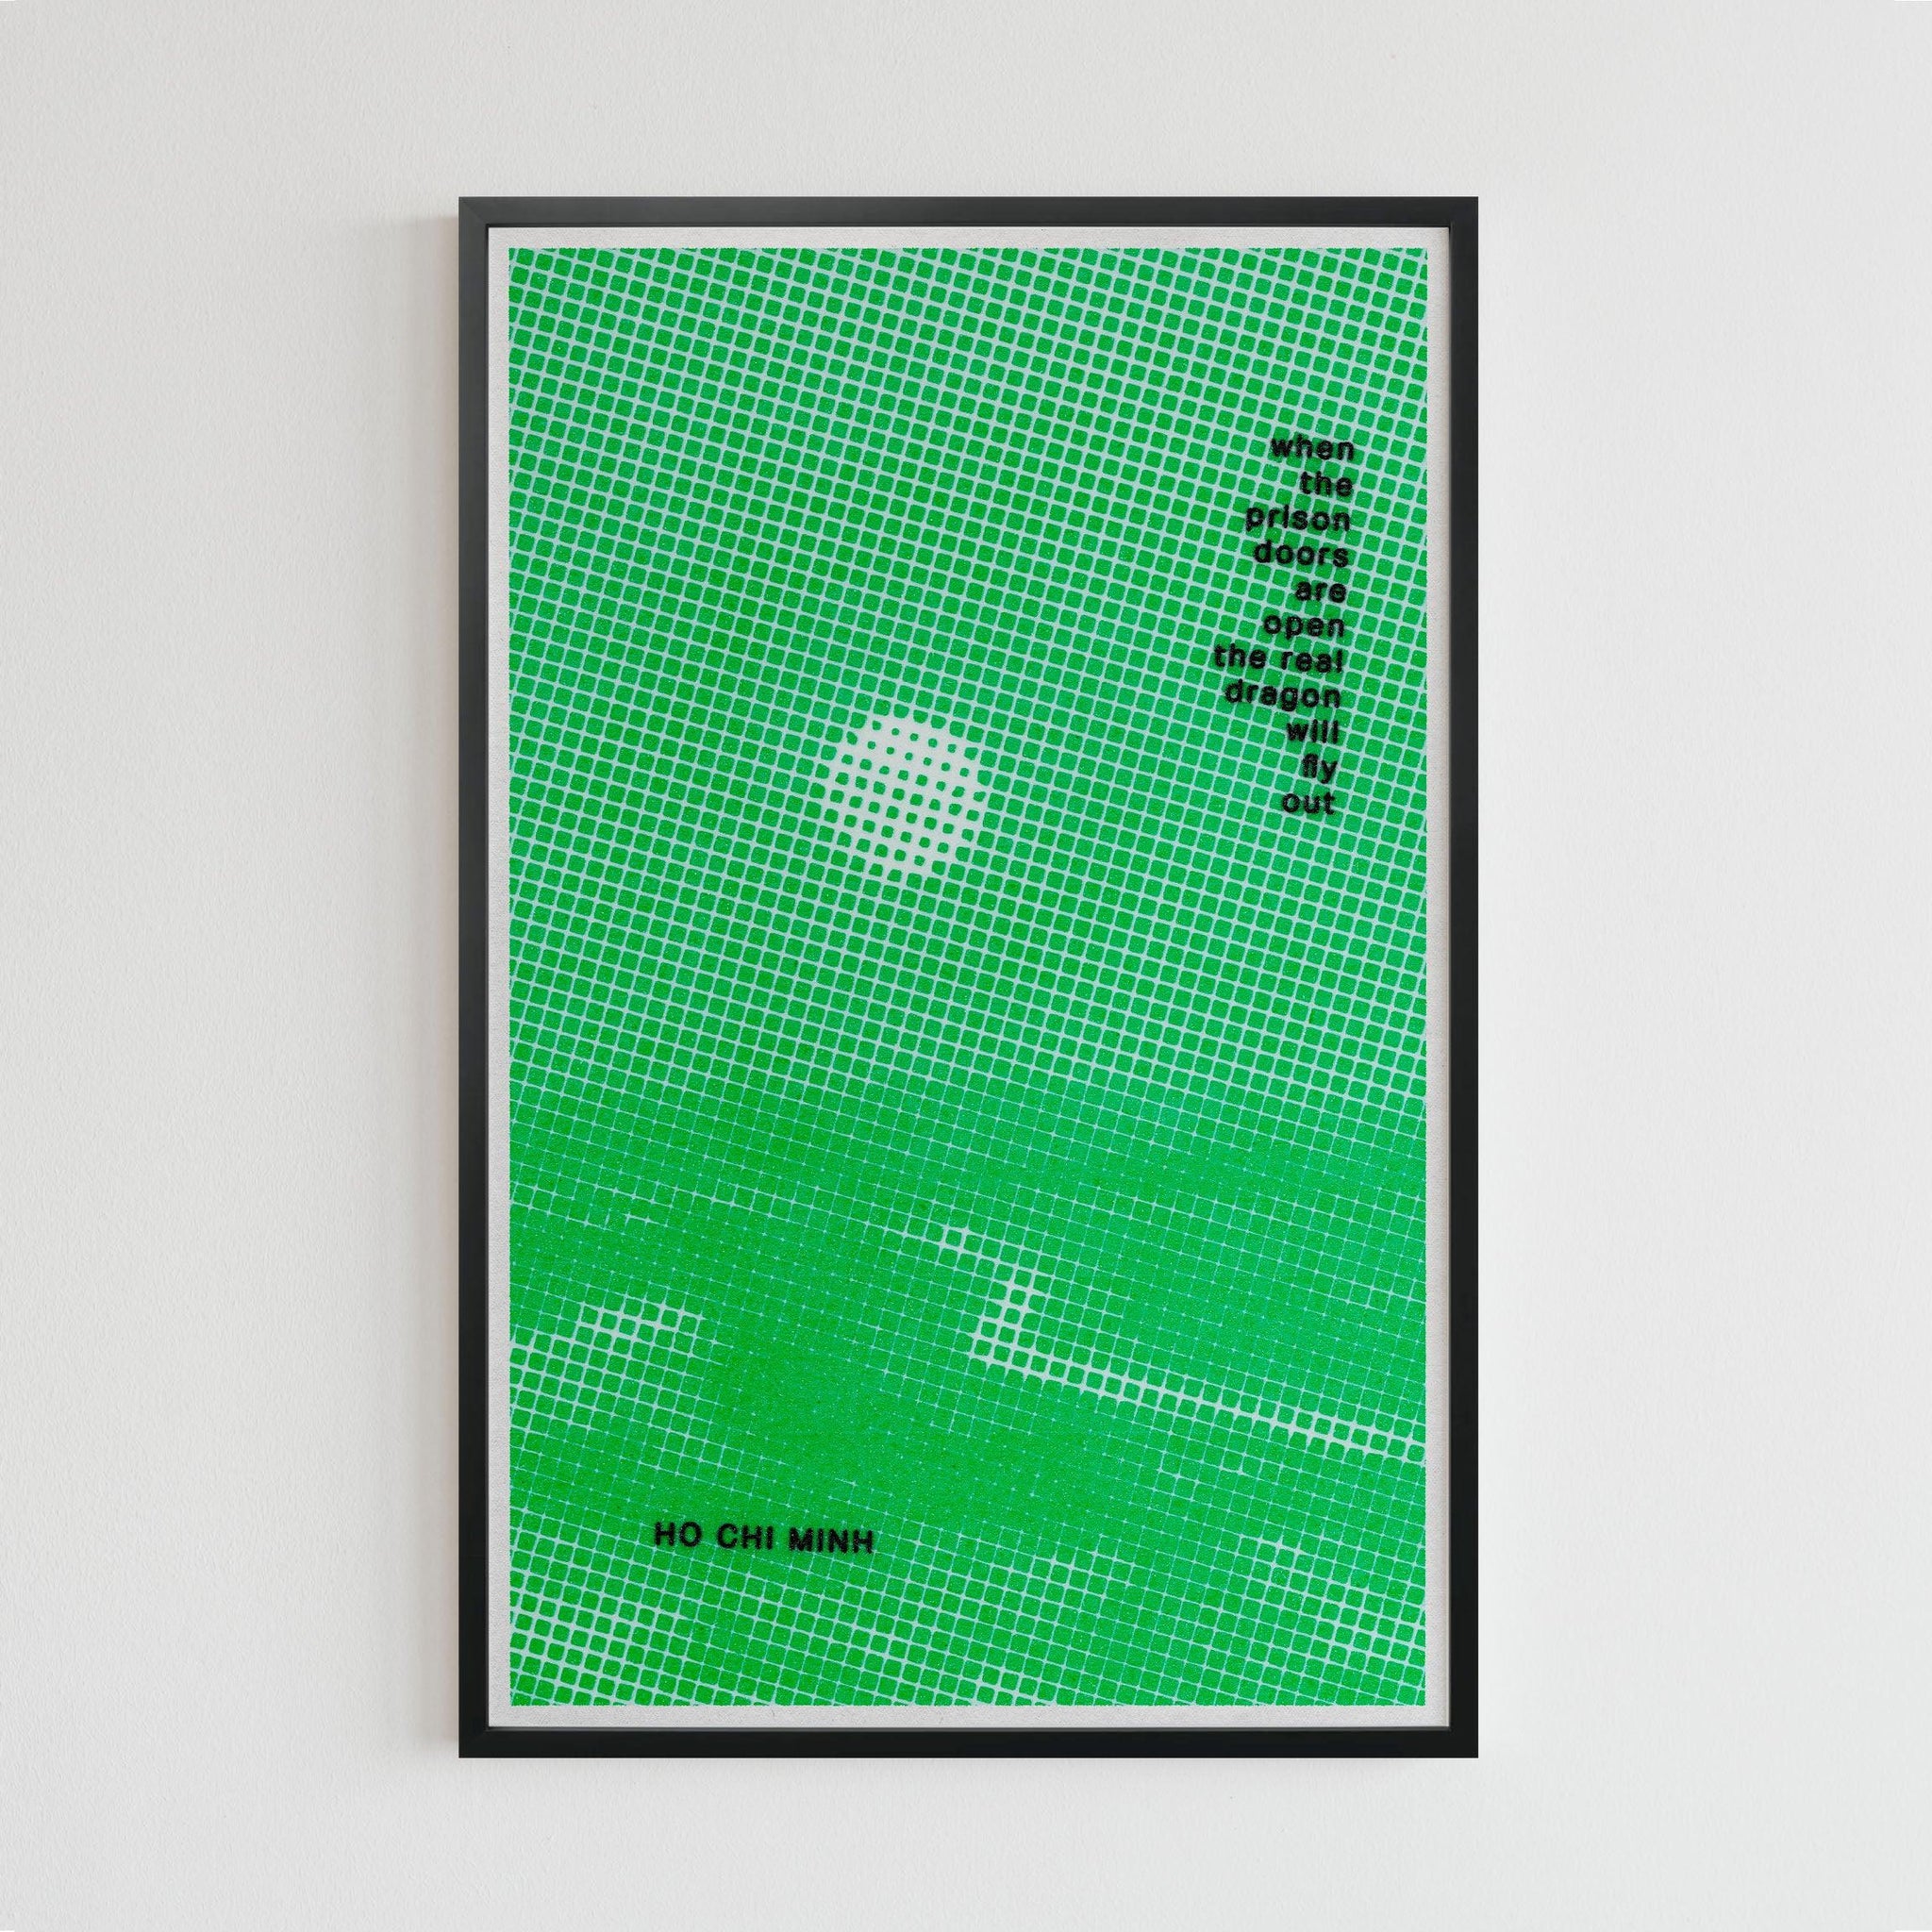 Ho Chi Minh quote(11 x 17 Poster print) - Color Collective Press